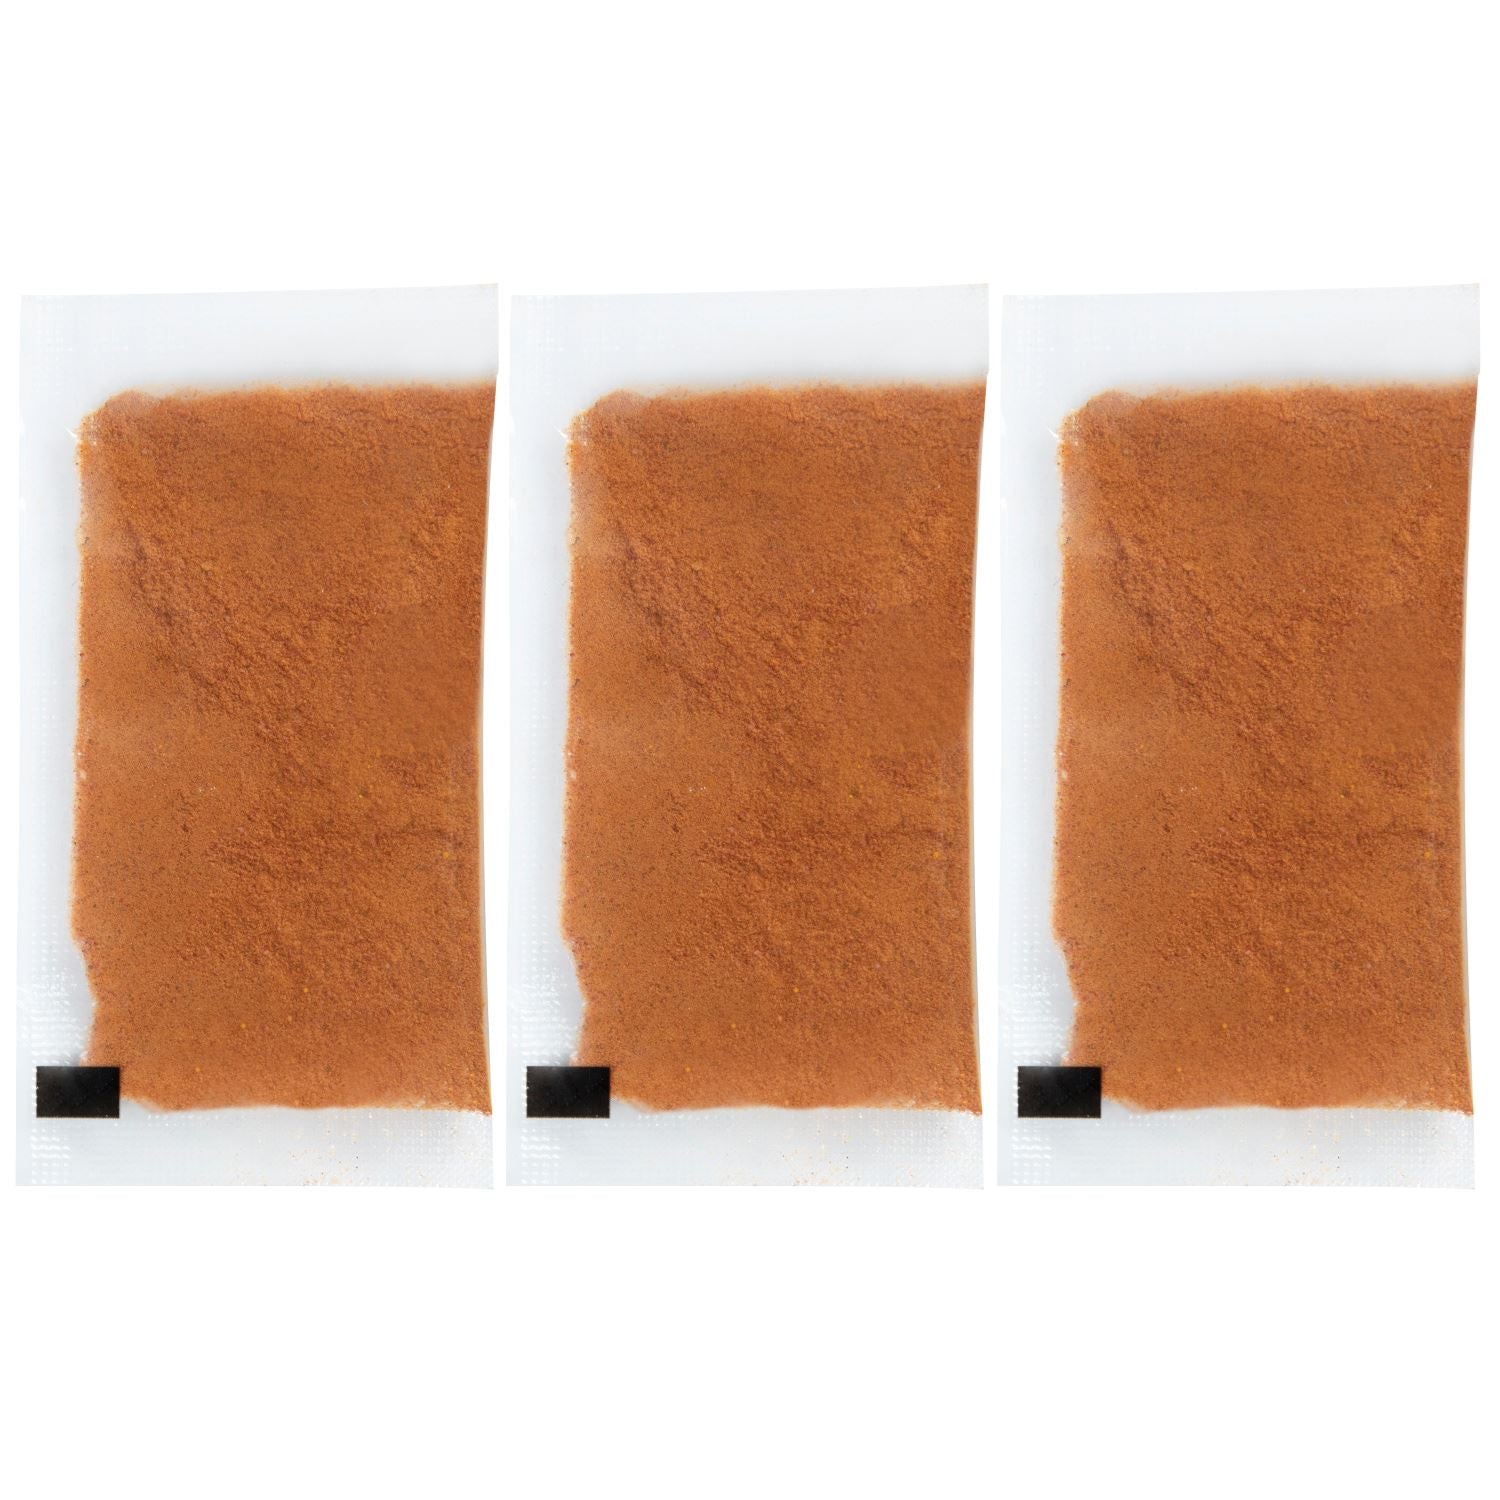 Picture of 47327 One-Step Tie-Dye Refills Coral